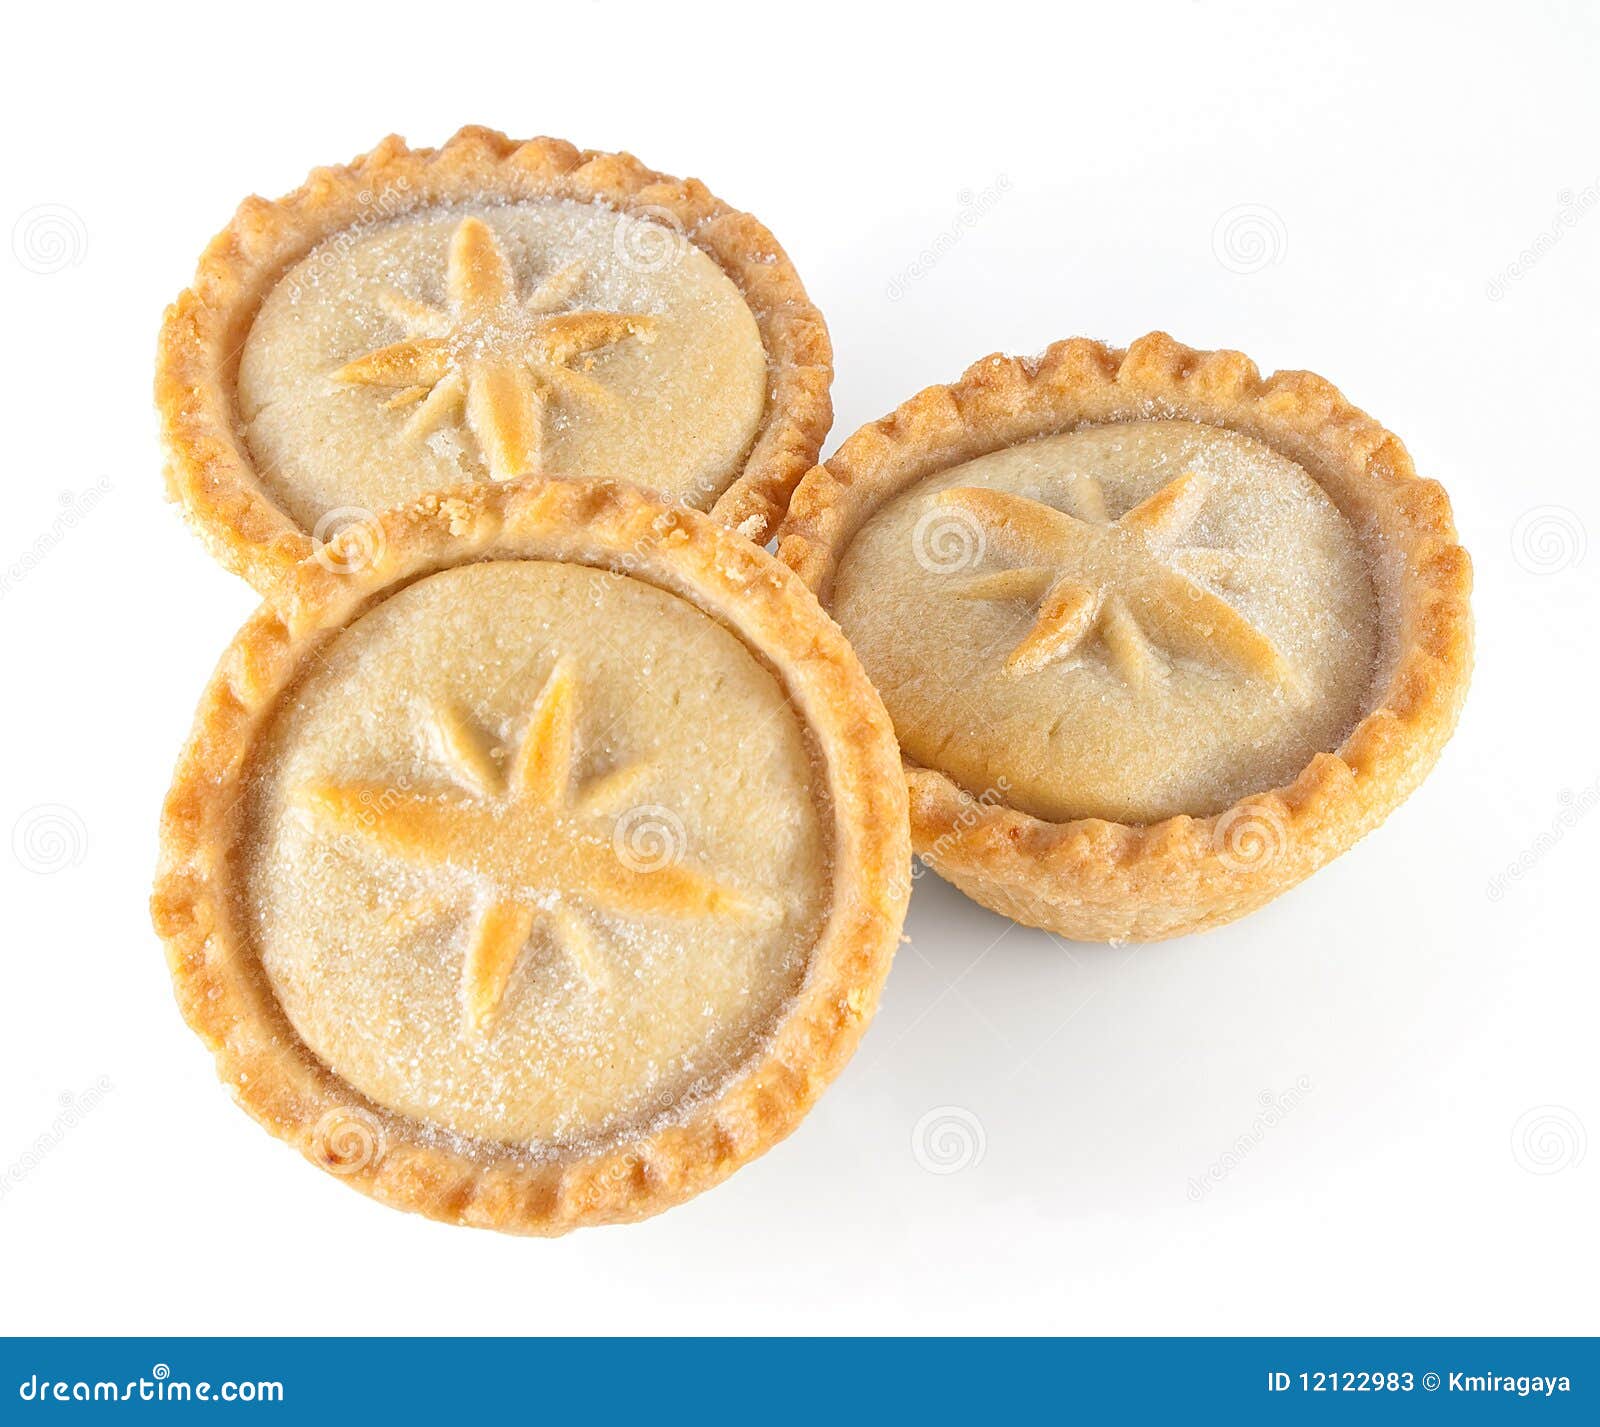 clipart christmas mince pies - photo #6